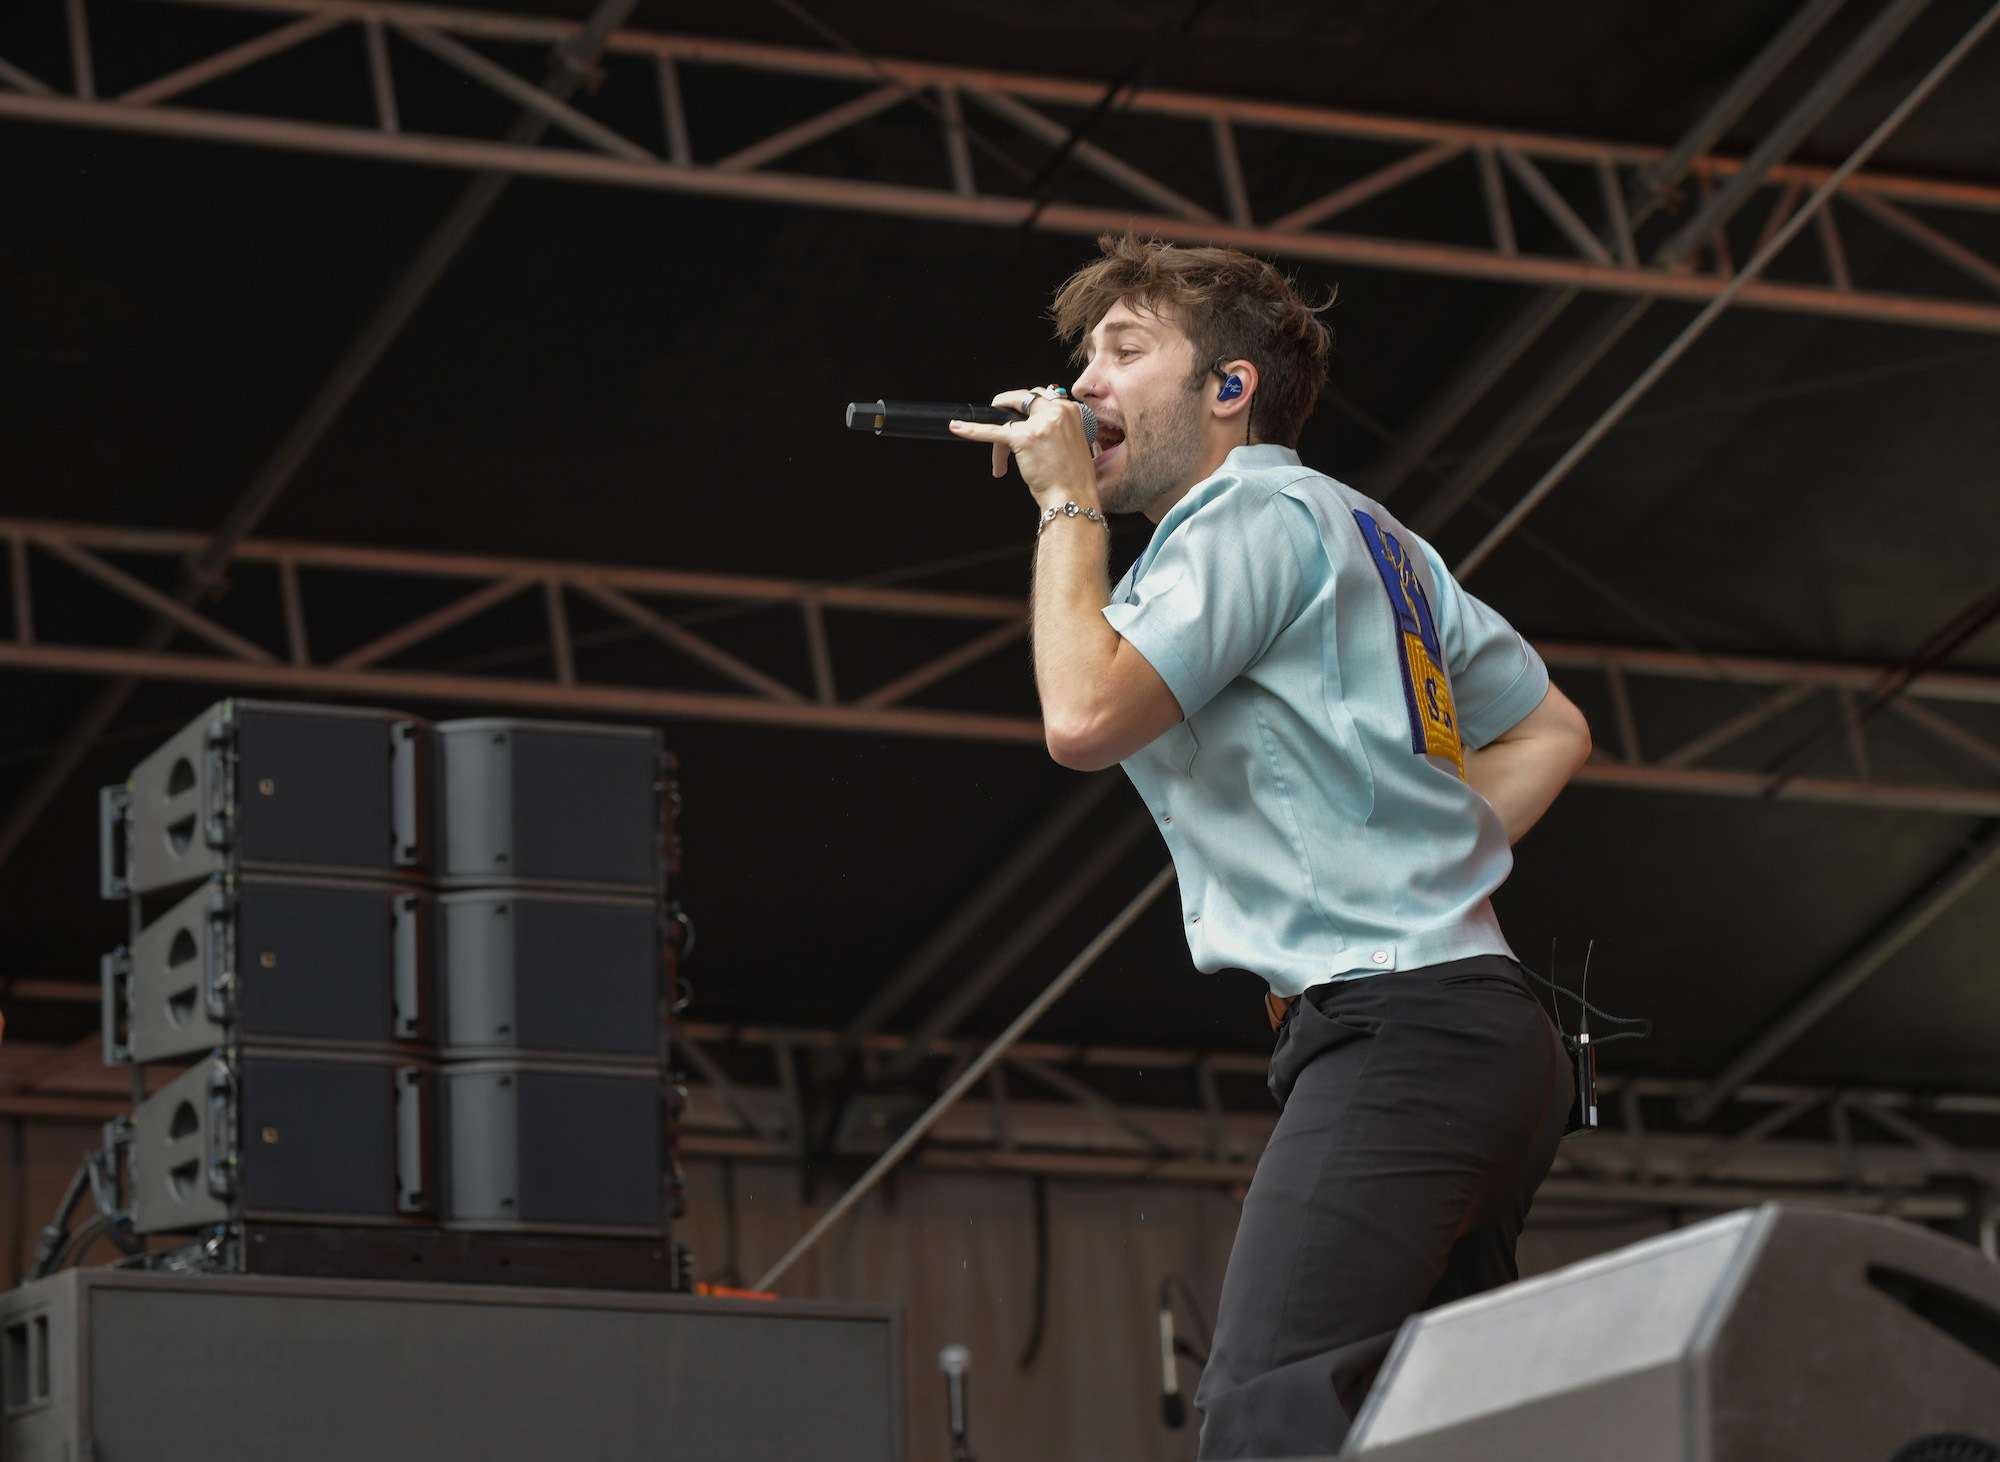 Christian French Live at Lollapalooza [GALLERY] 4